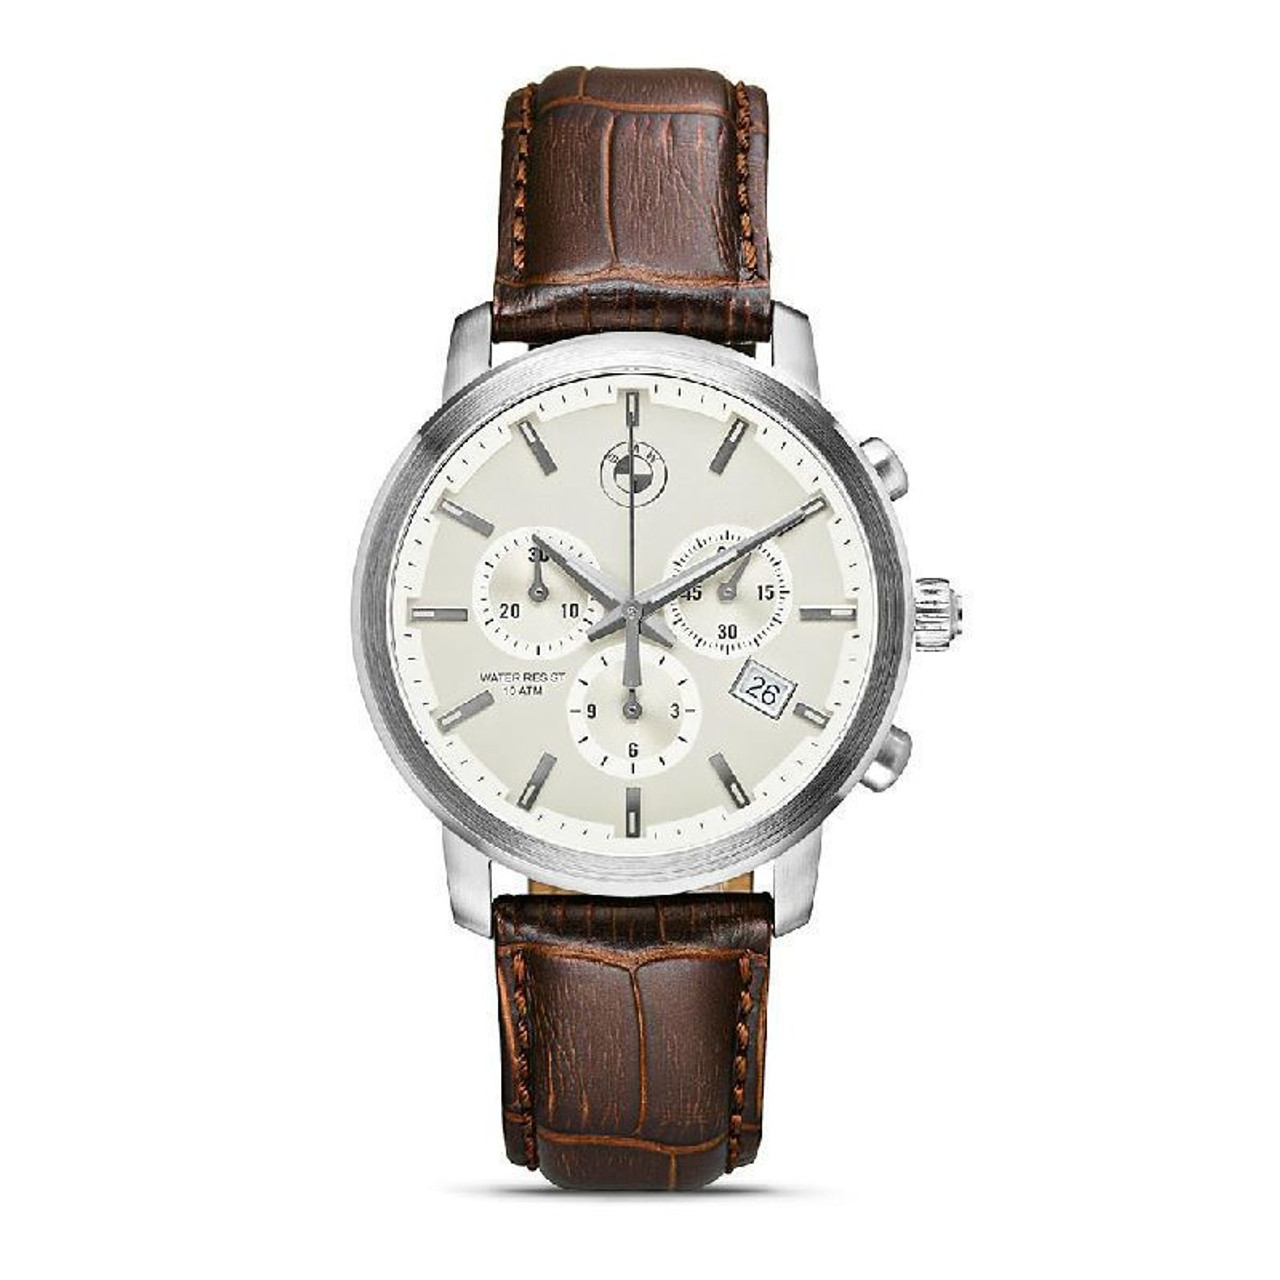 No Longer Available - BMW Lifestyle Mens Watch-Brown leather